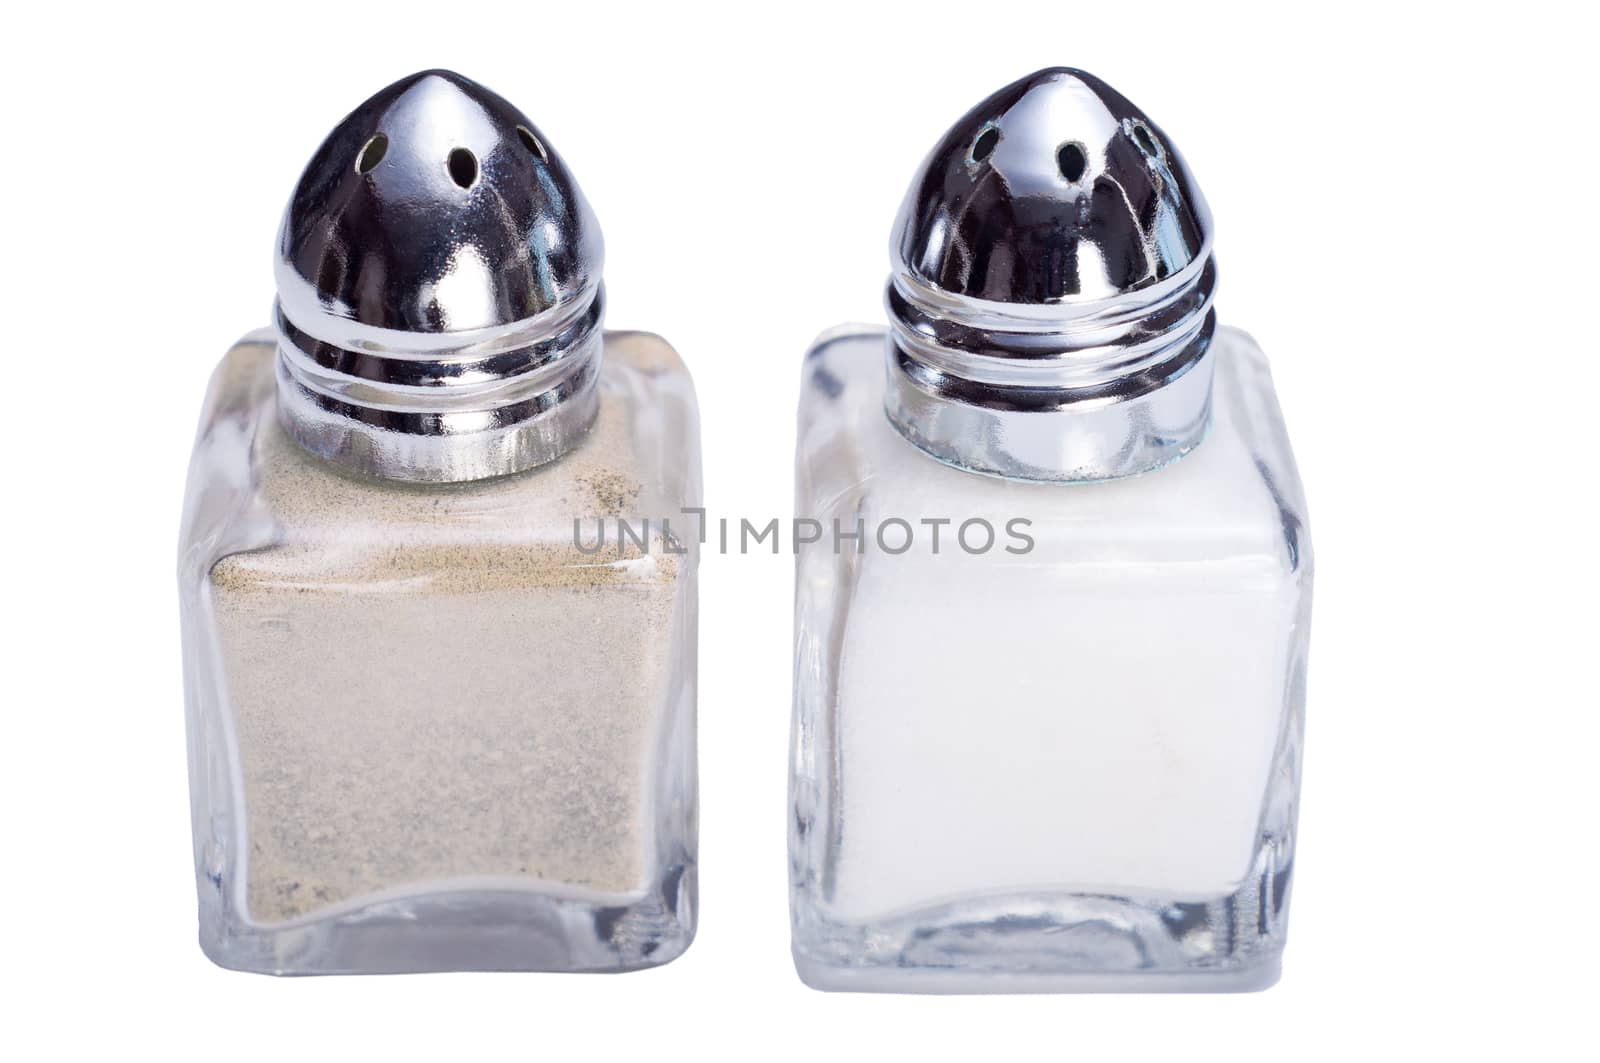 Closeup photograph of small silver and glass salt and pepper cellars